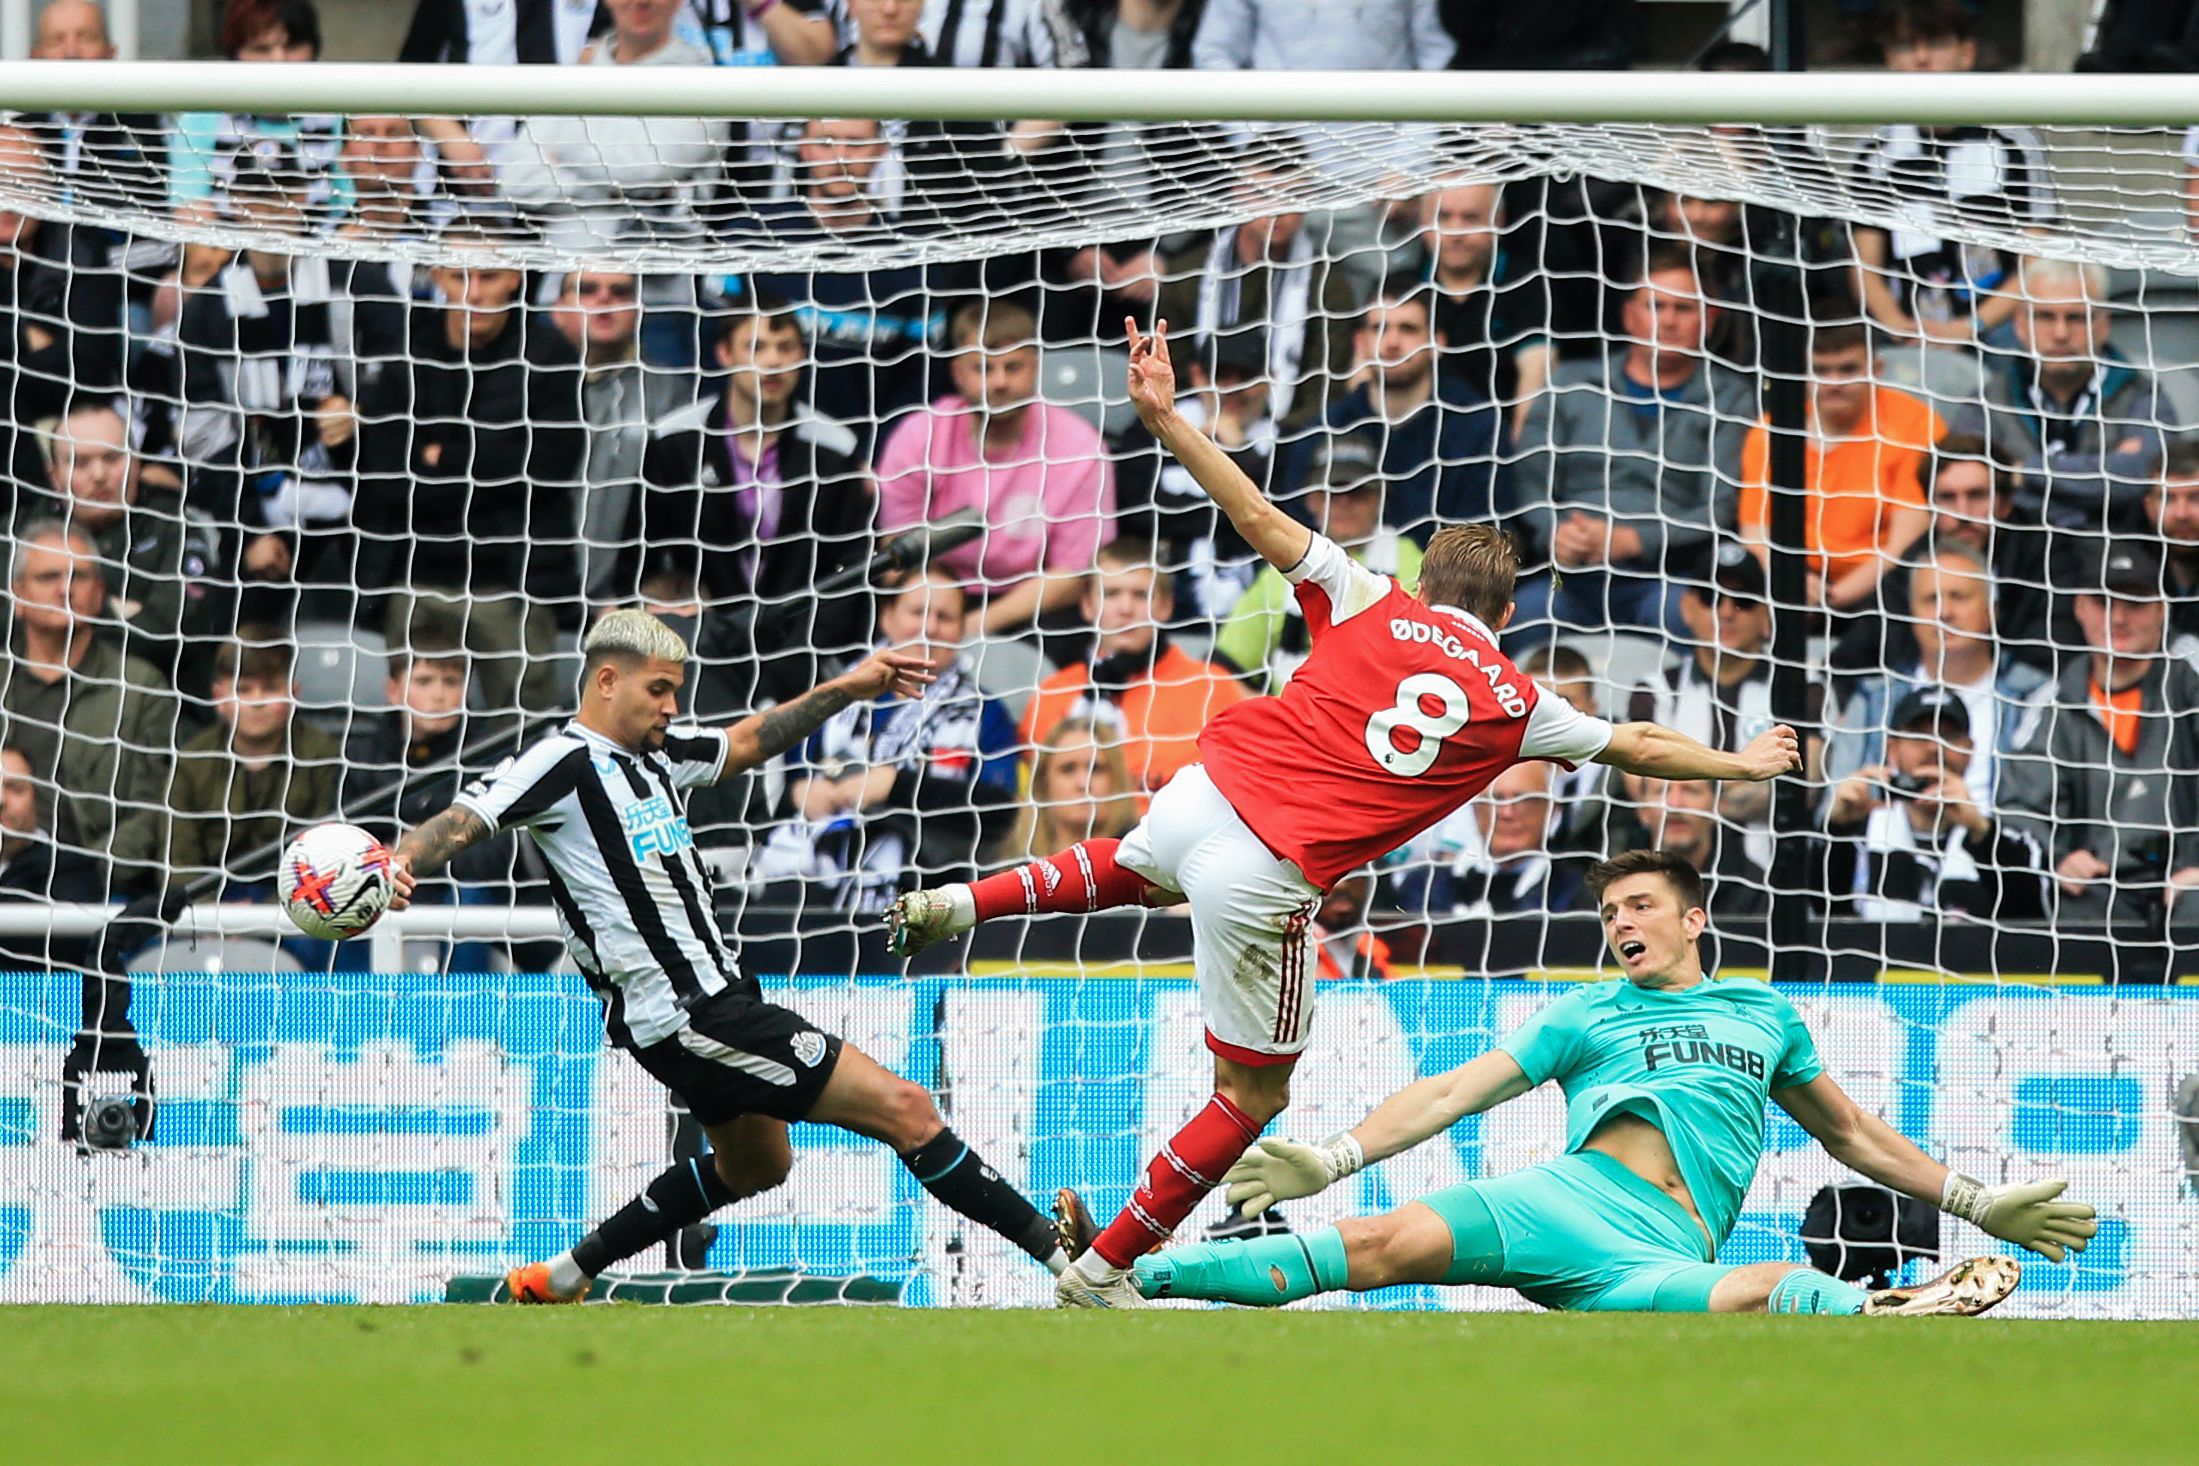 Newcastle vs Arsenal final score, result and highlights as